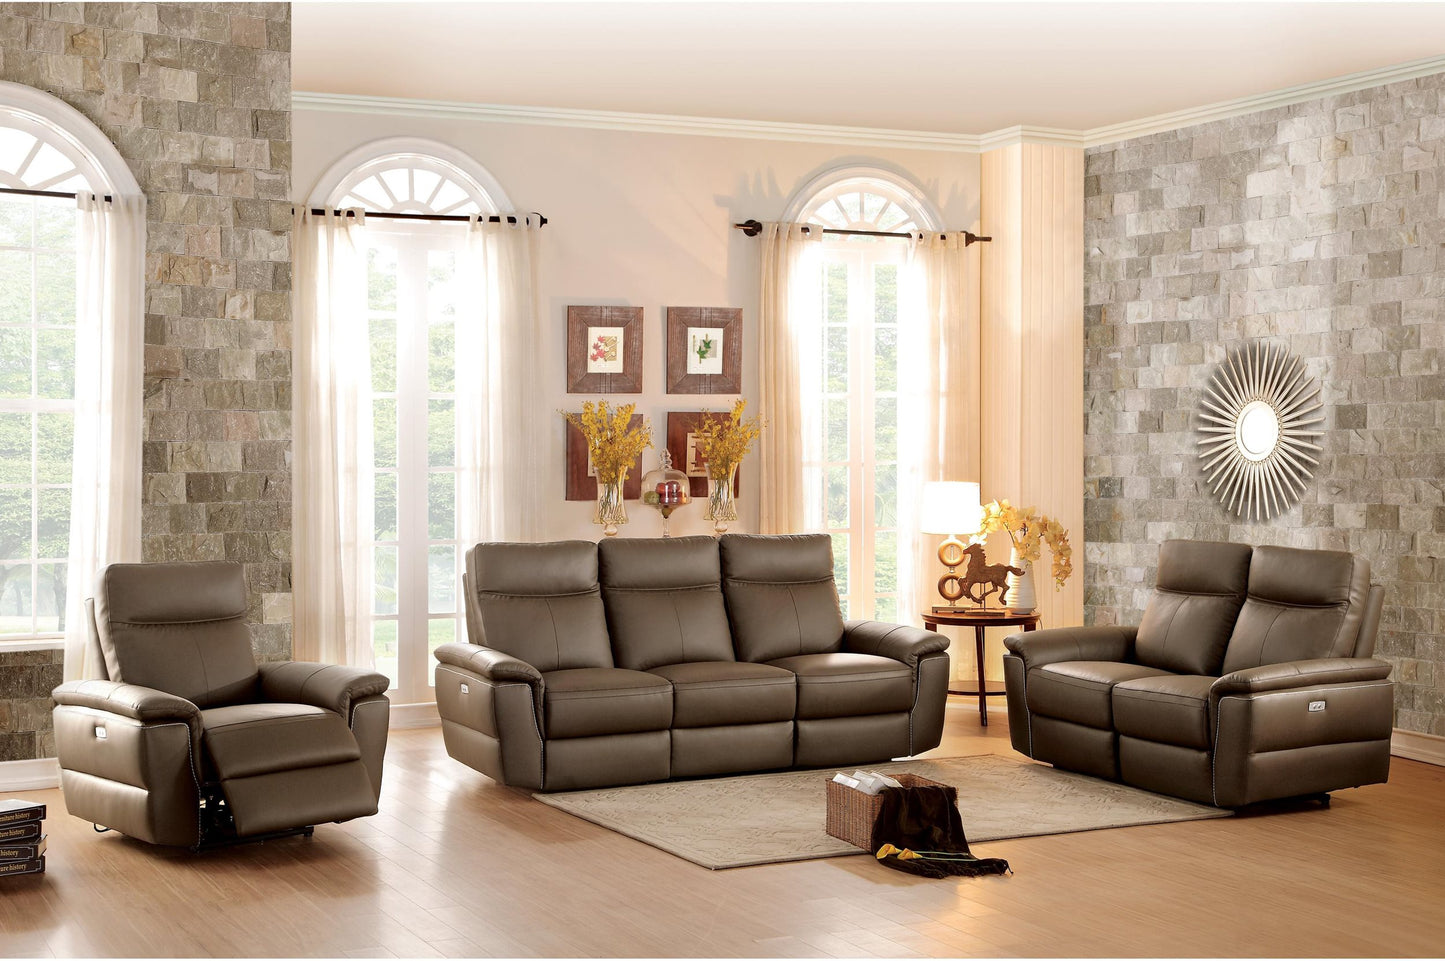 Homelegance Olympia Power Double Reclining Sofa in Top Grain Leather - Raisin